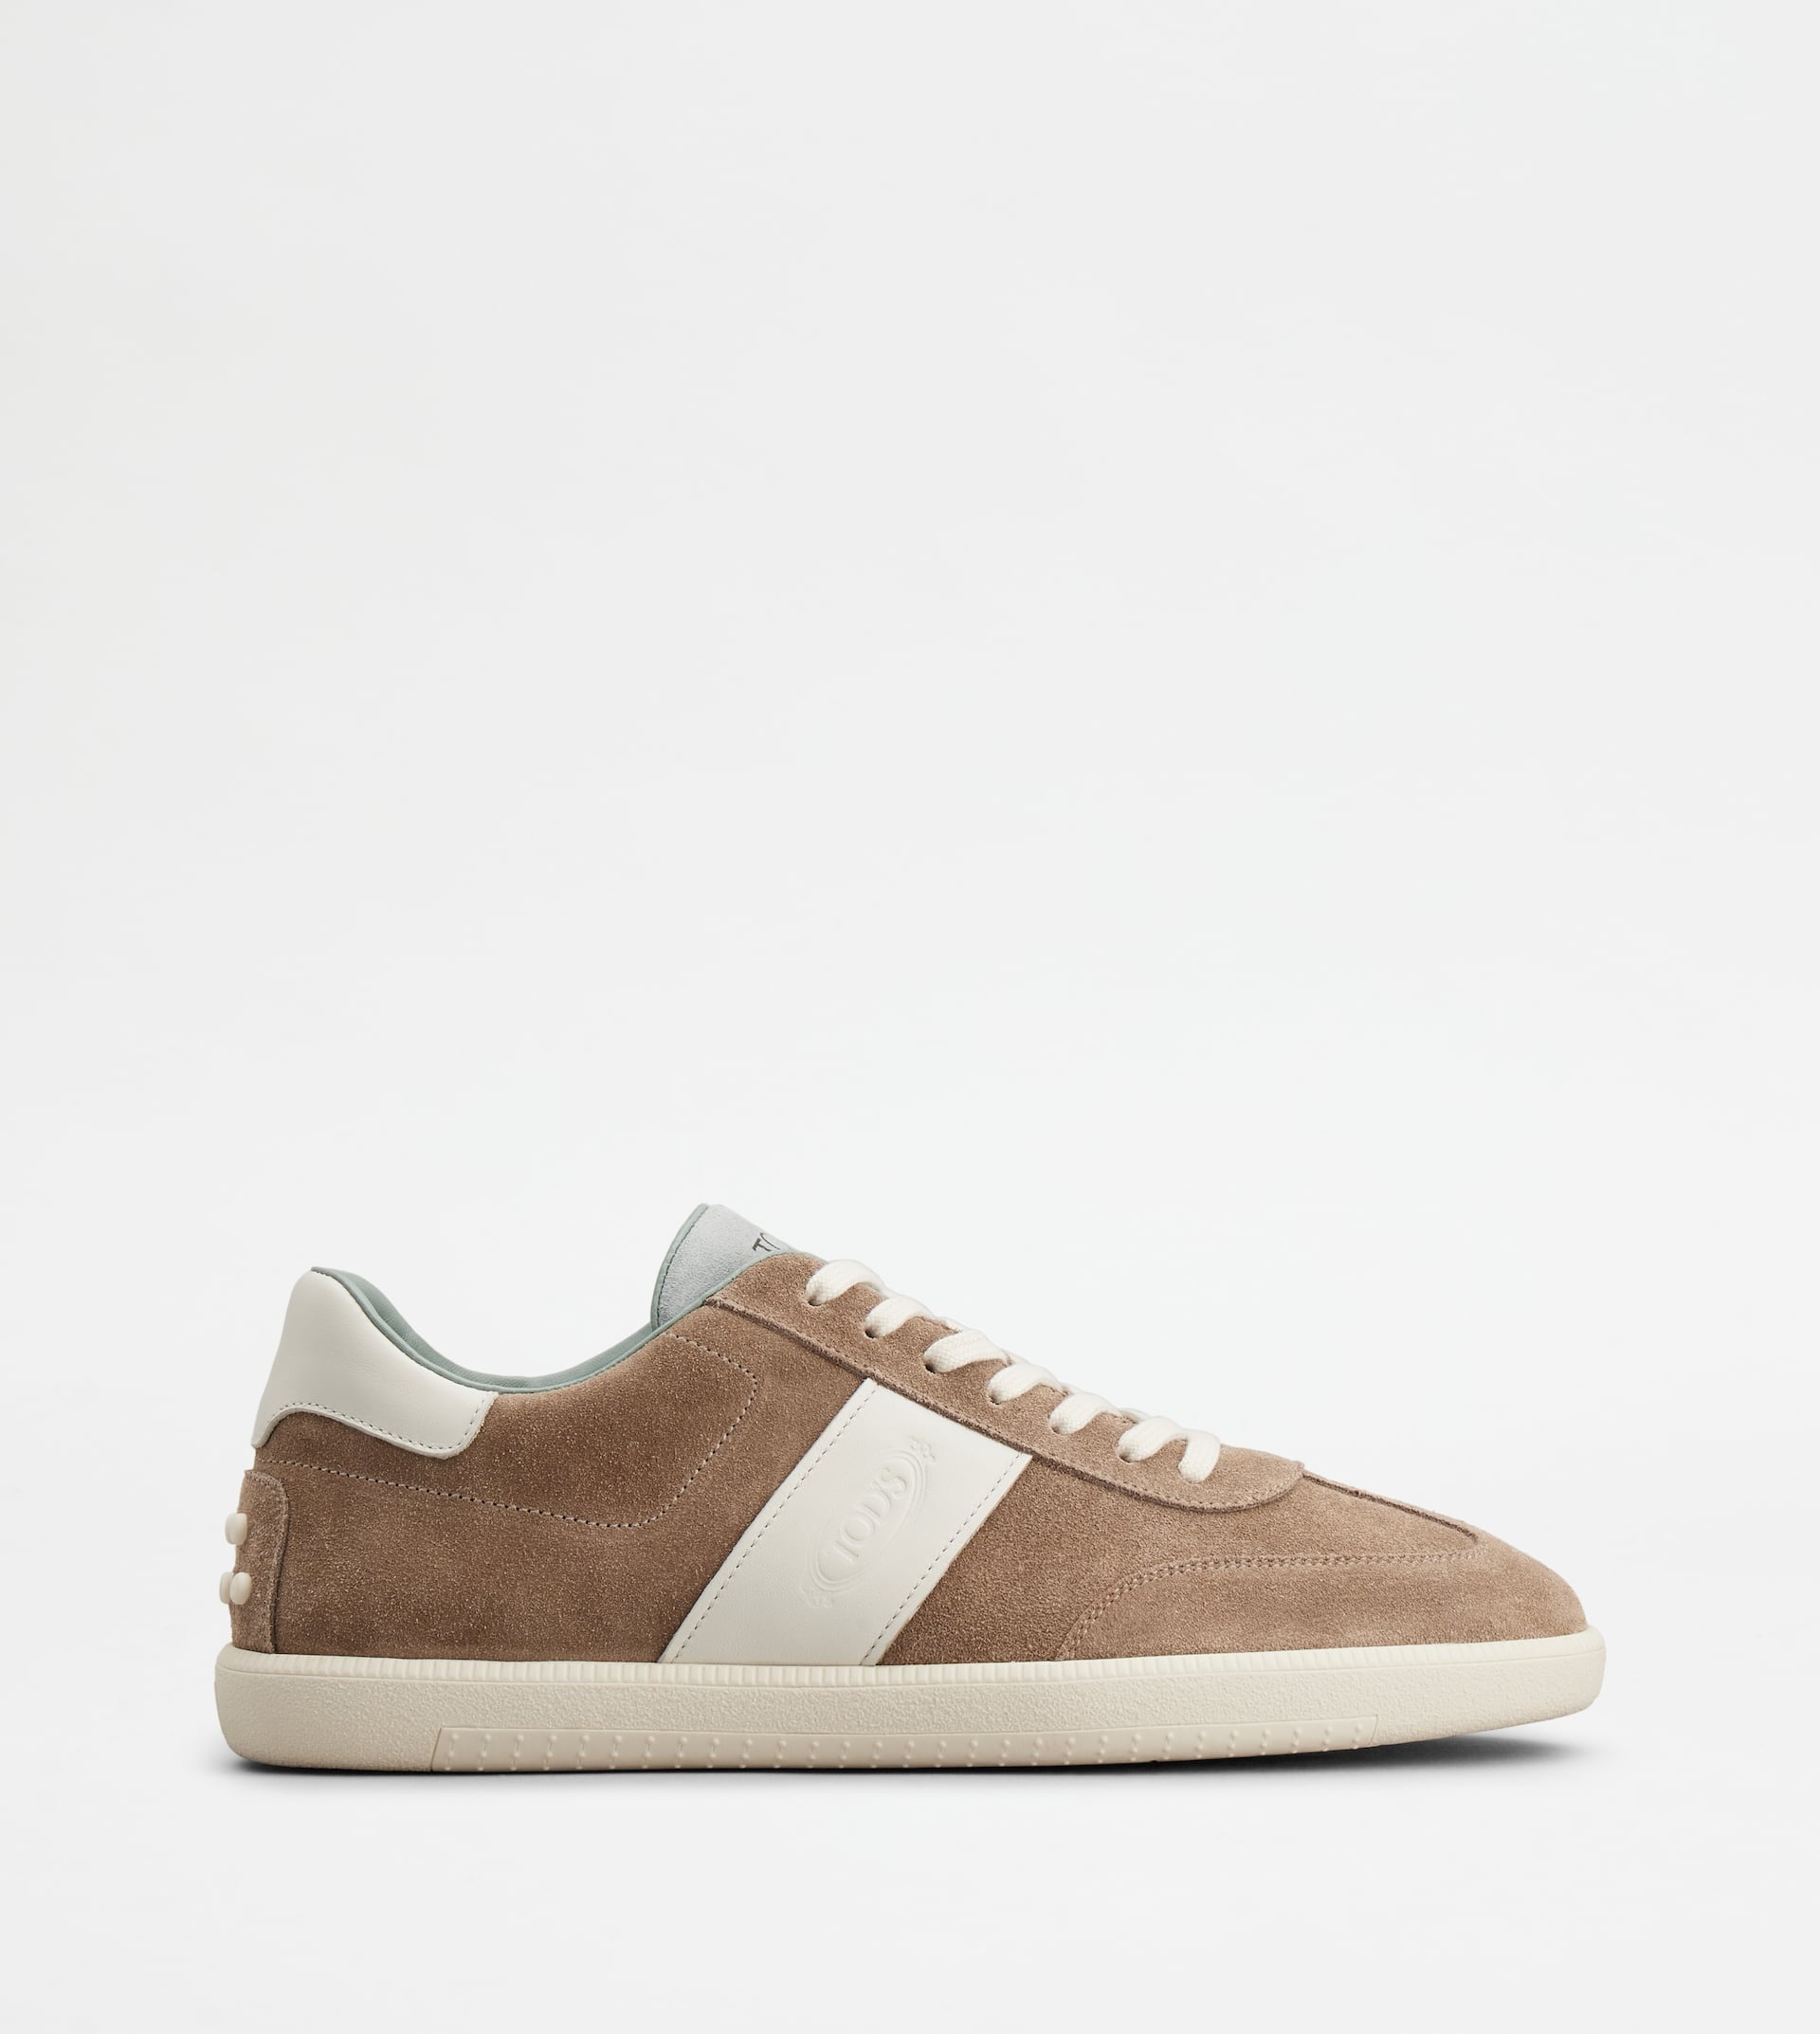 TOD'S TABS SNEAKERS IN SUEDE - BROWN, WHITE, LIGHT BLUE - 1